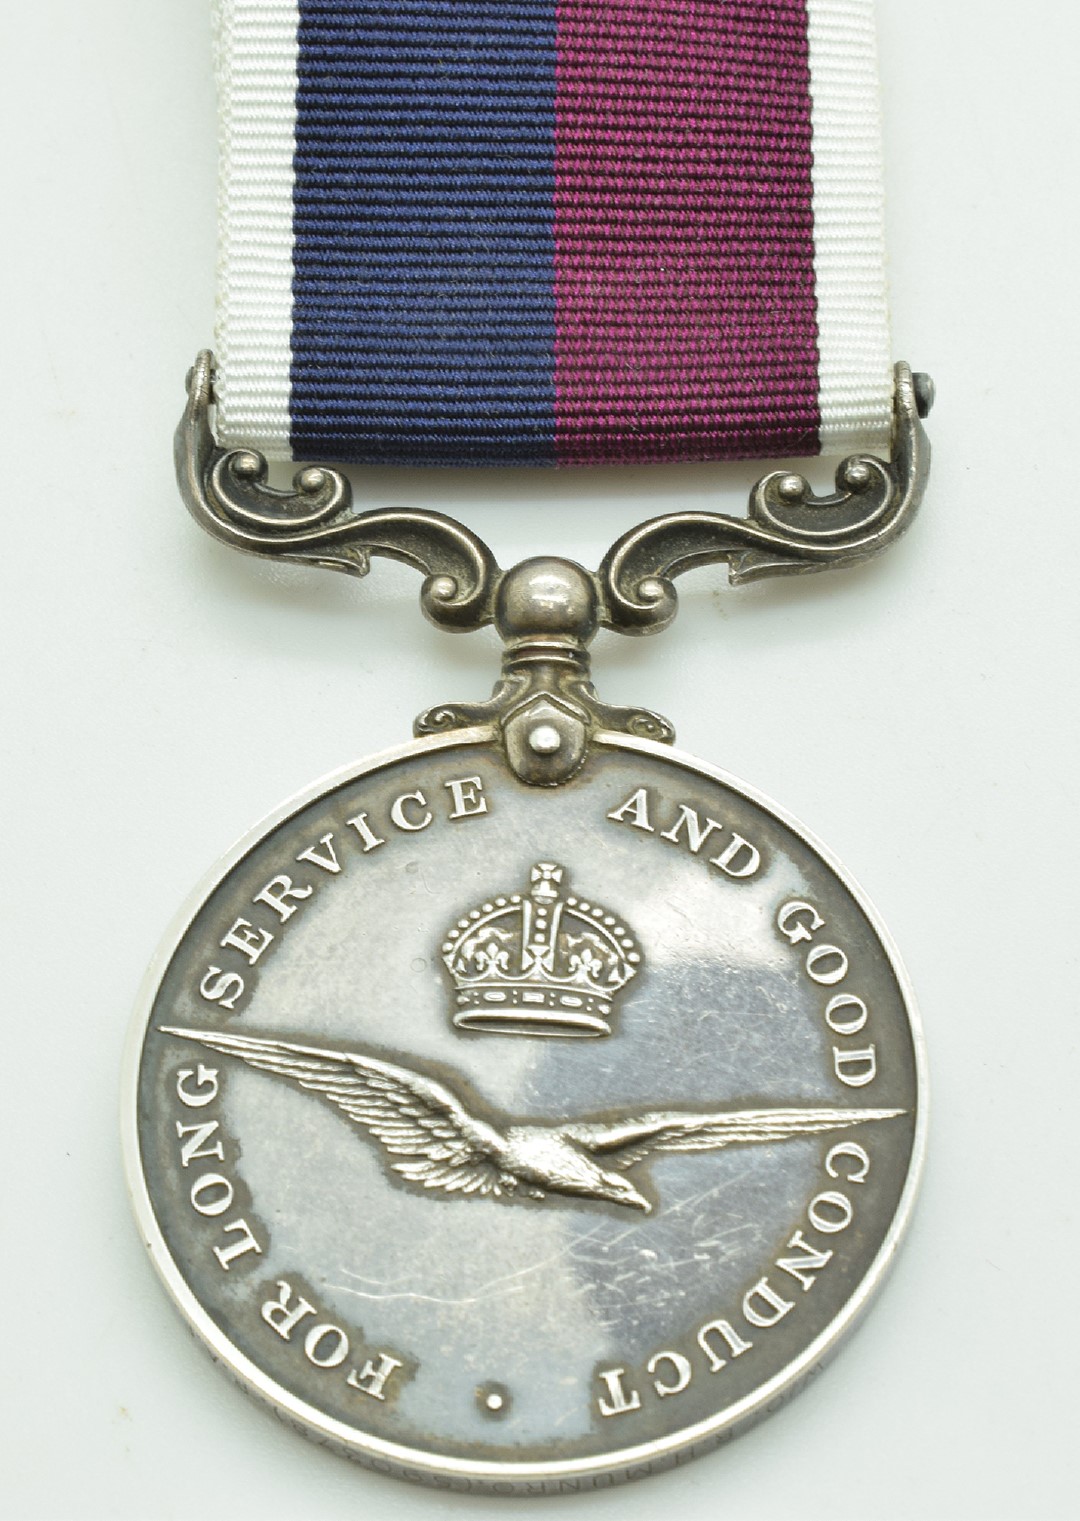 Royal Air Force Long Service and Good Conduct Medal named to Warrant Officer R H Munro 590378 RAF - Image 2 of 5